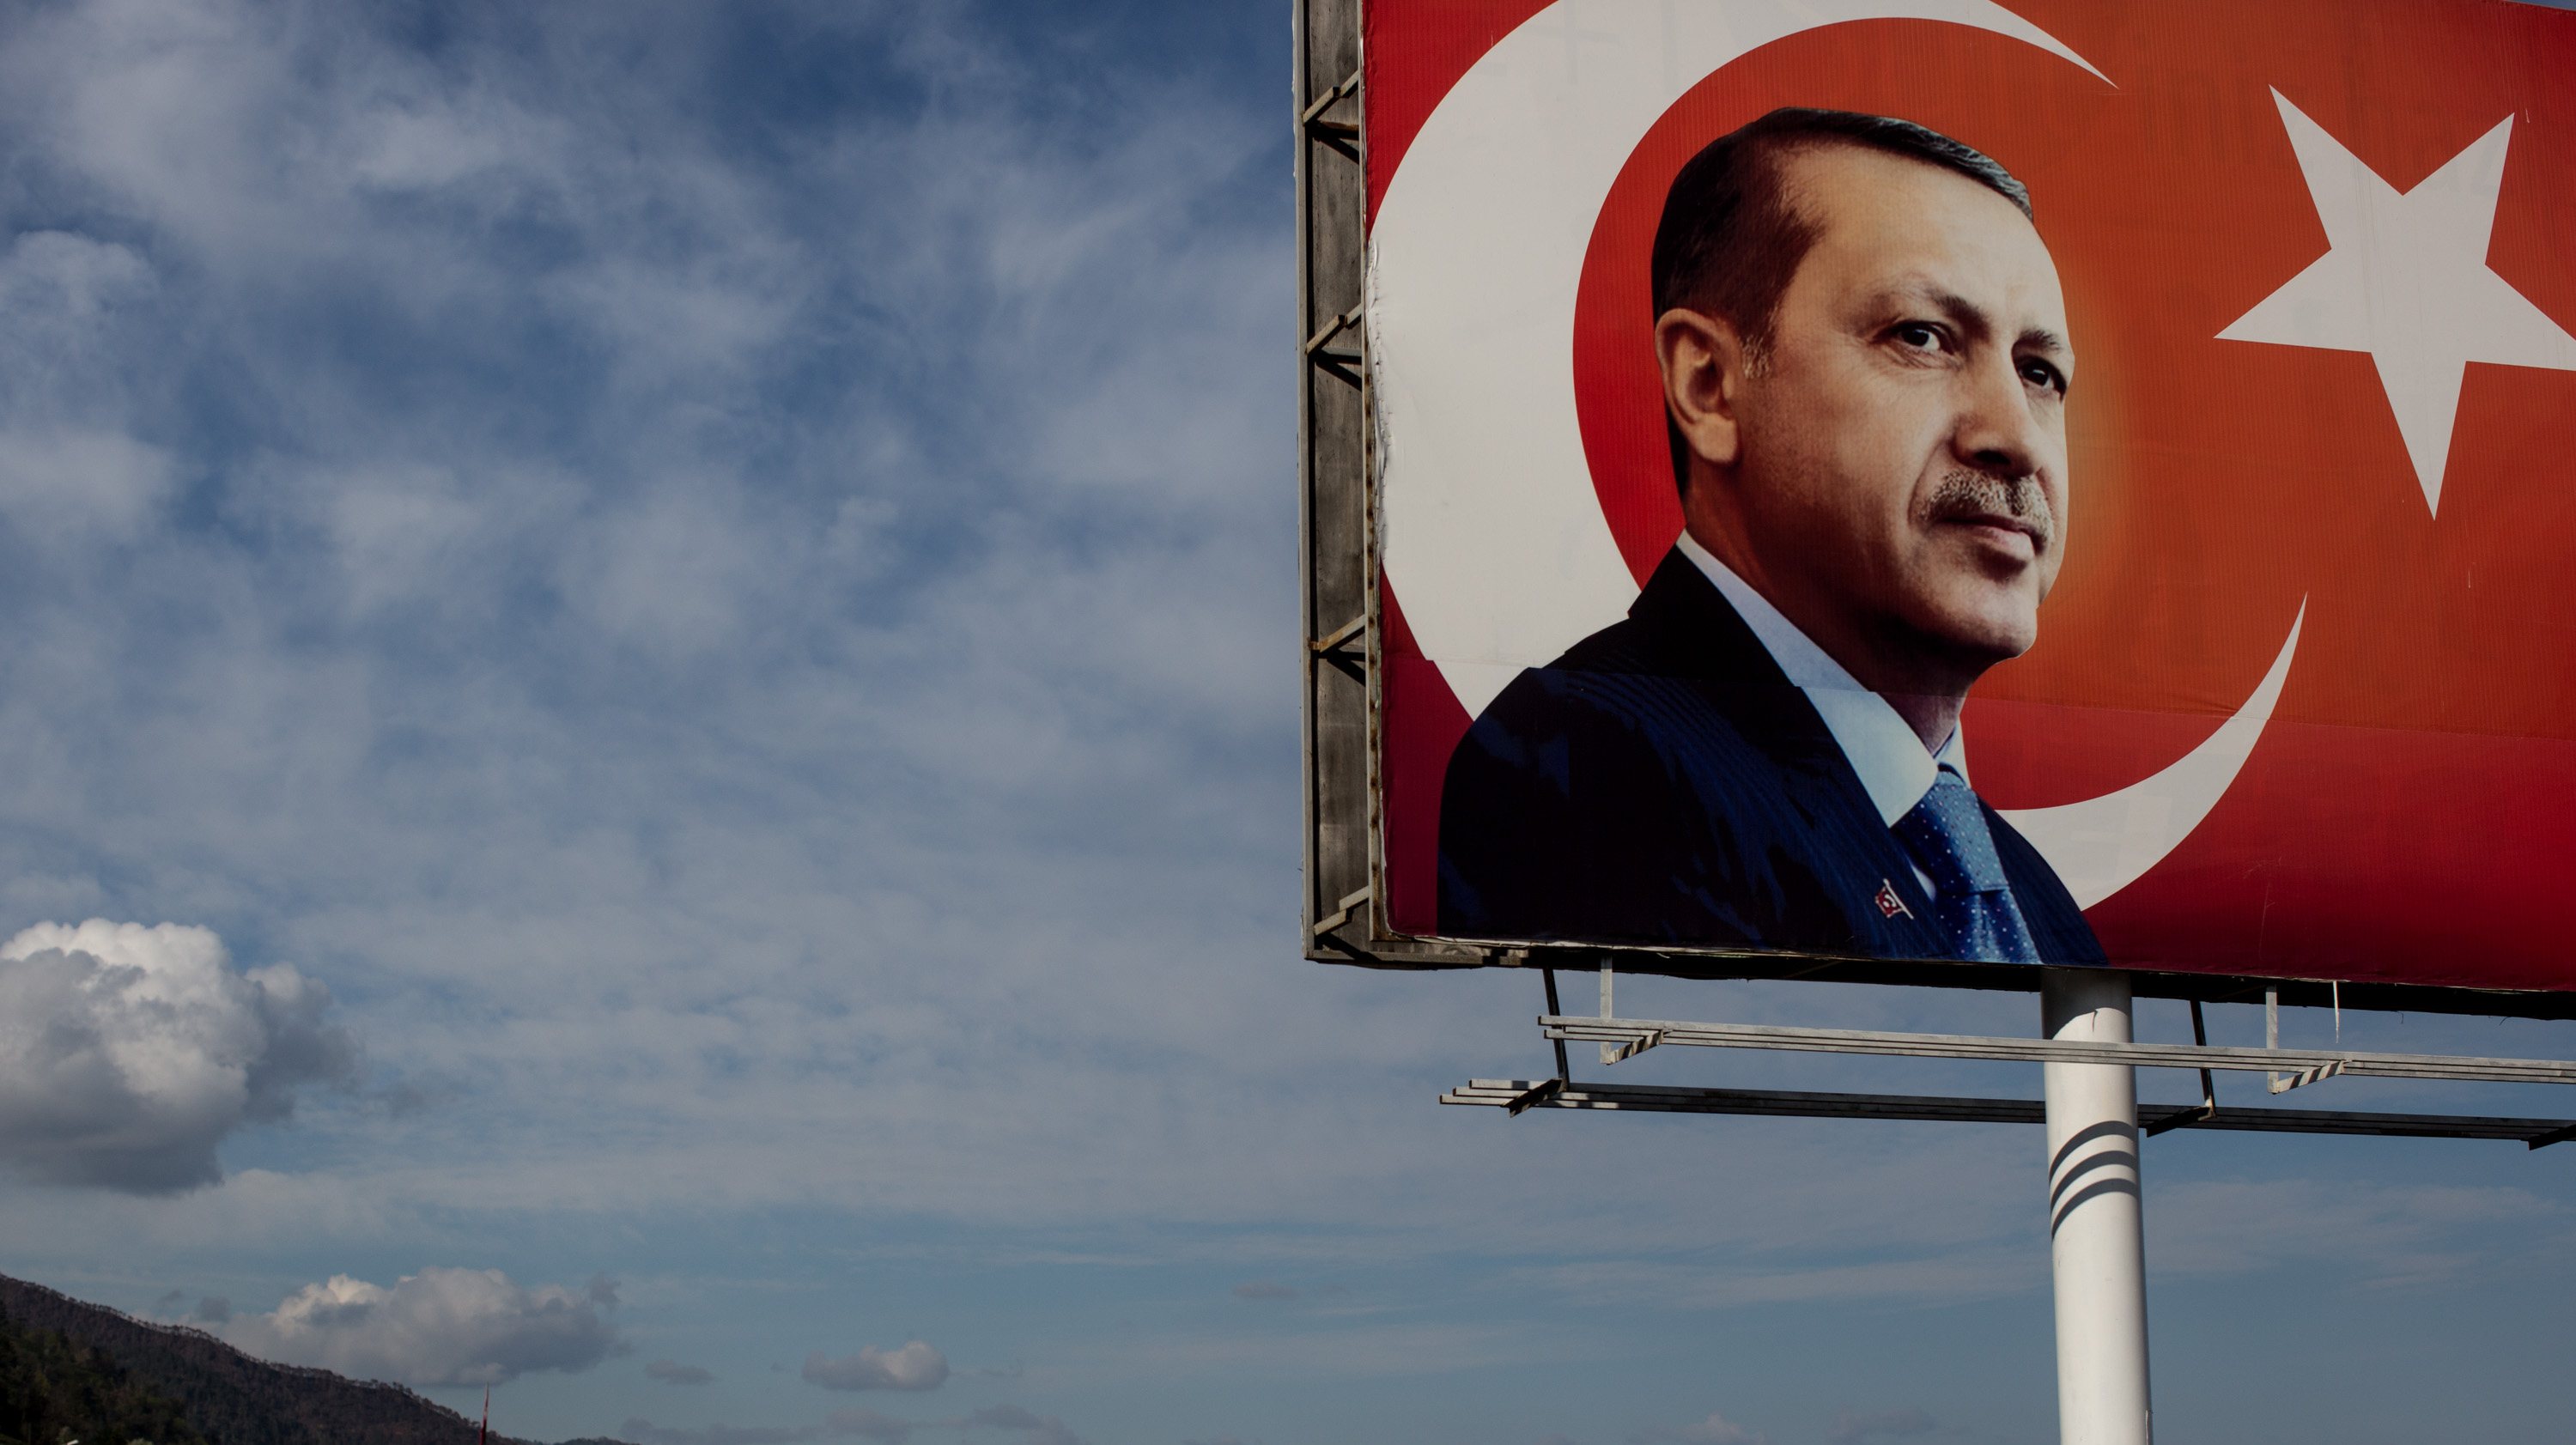 The Road To The Turkish Referendum